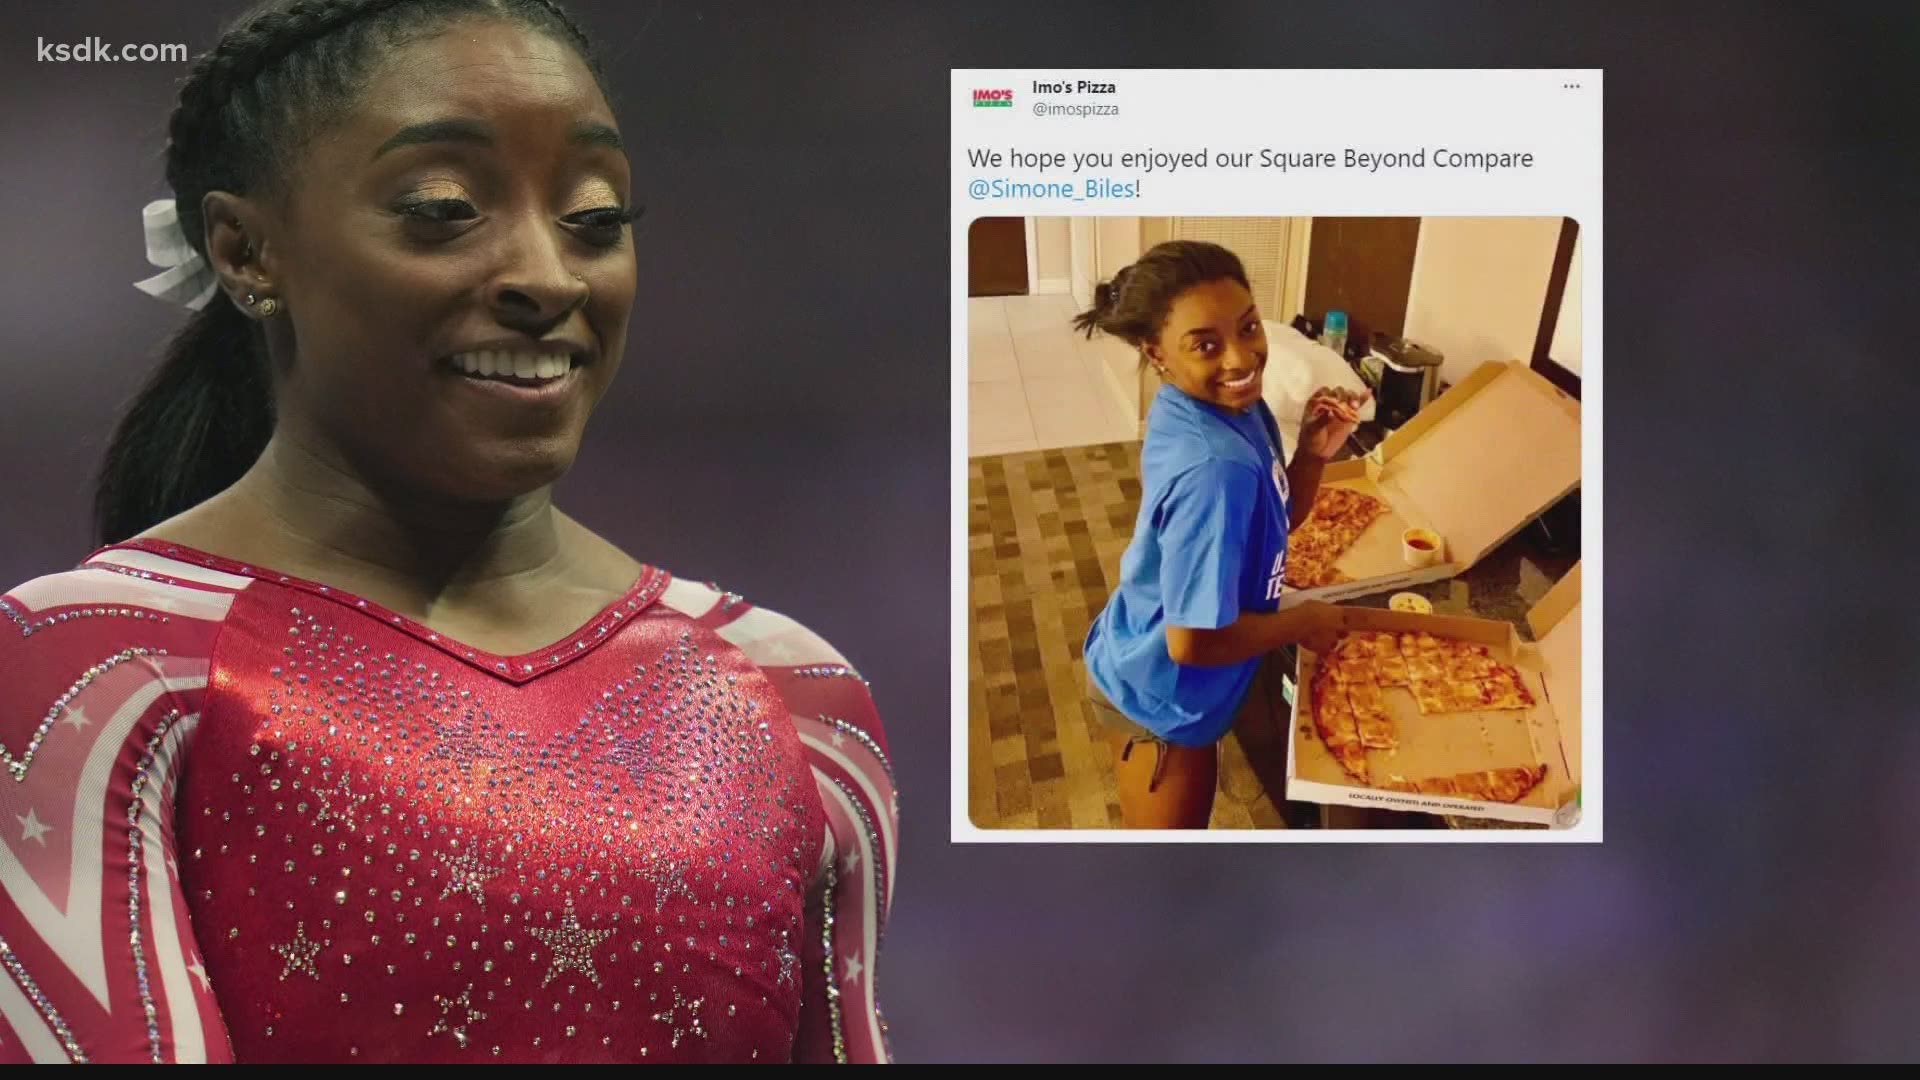 Simone Biles shared on Twitter that she wants another Imo's Pizza even though she's back in Texas. What do you think about Imo's?